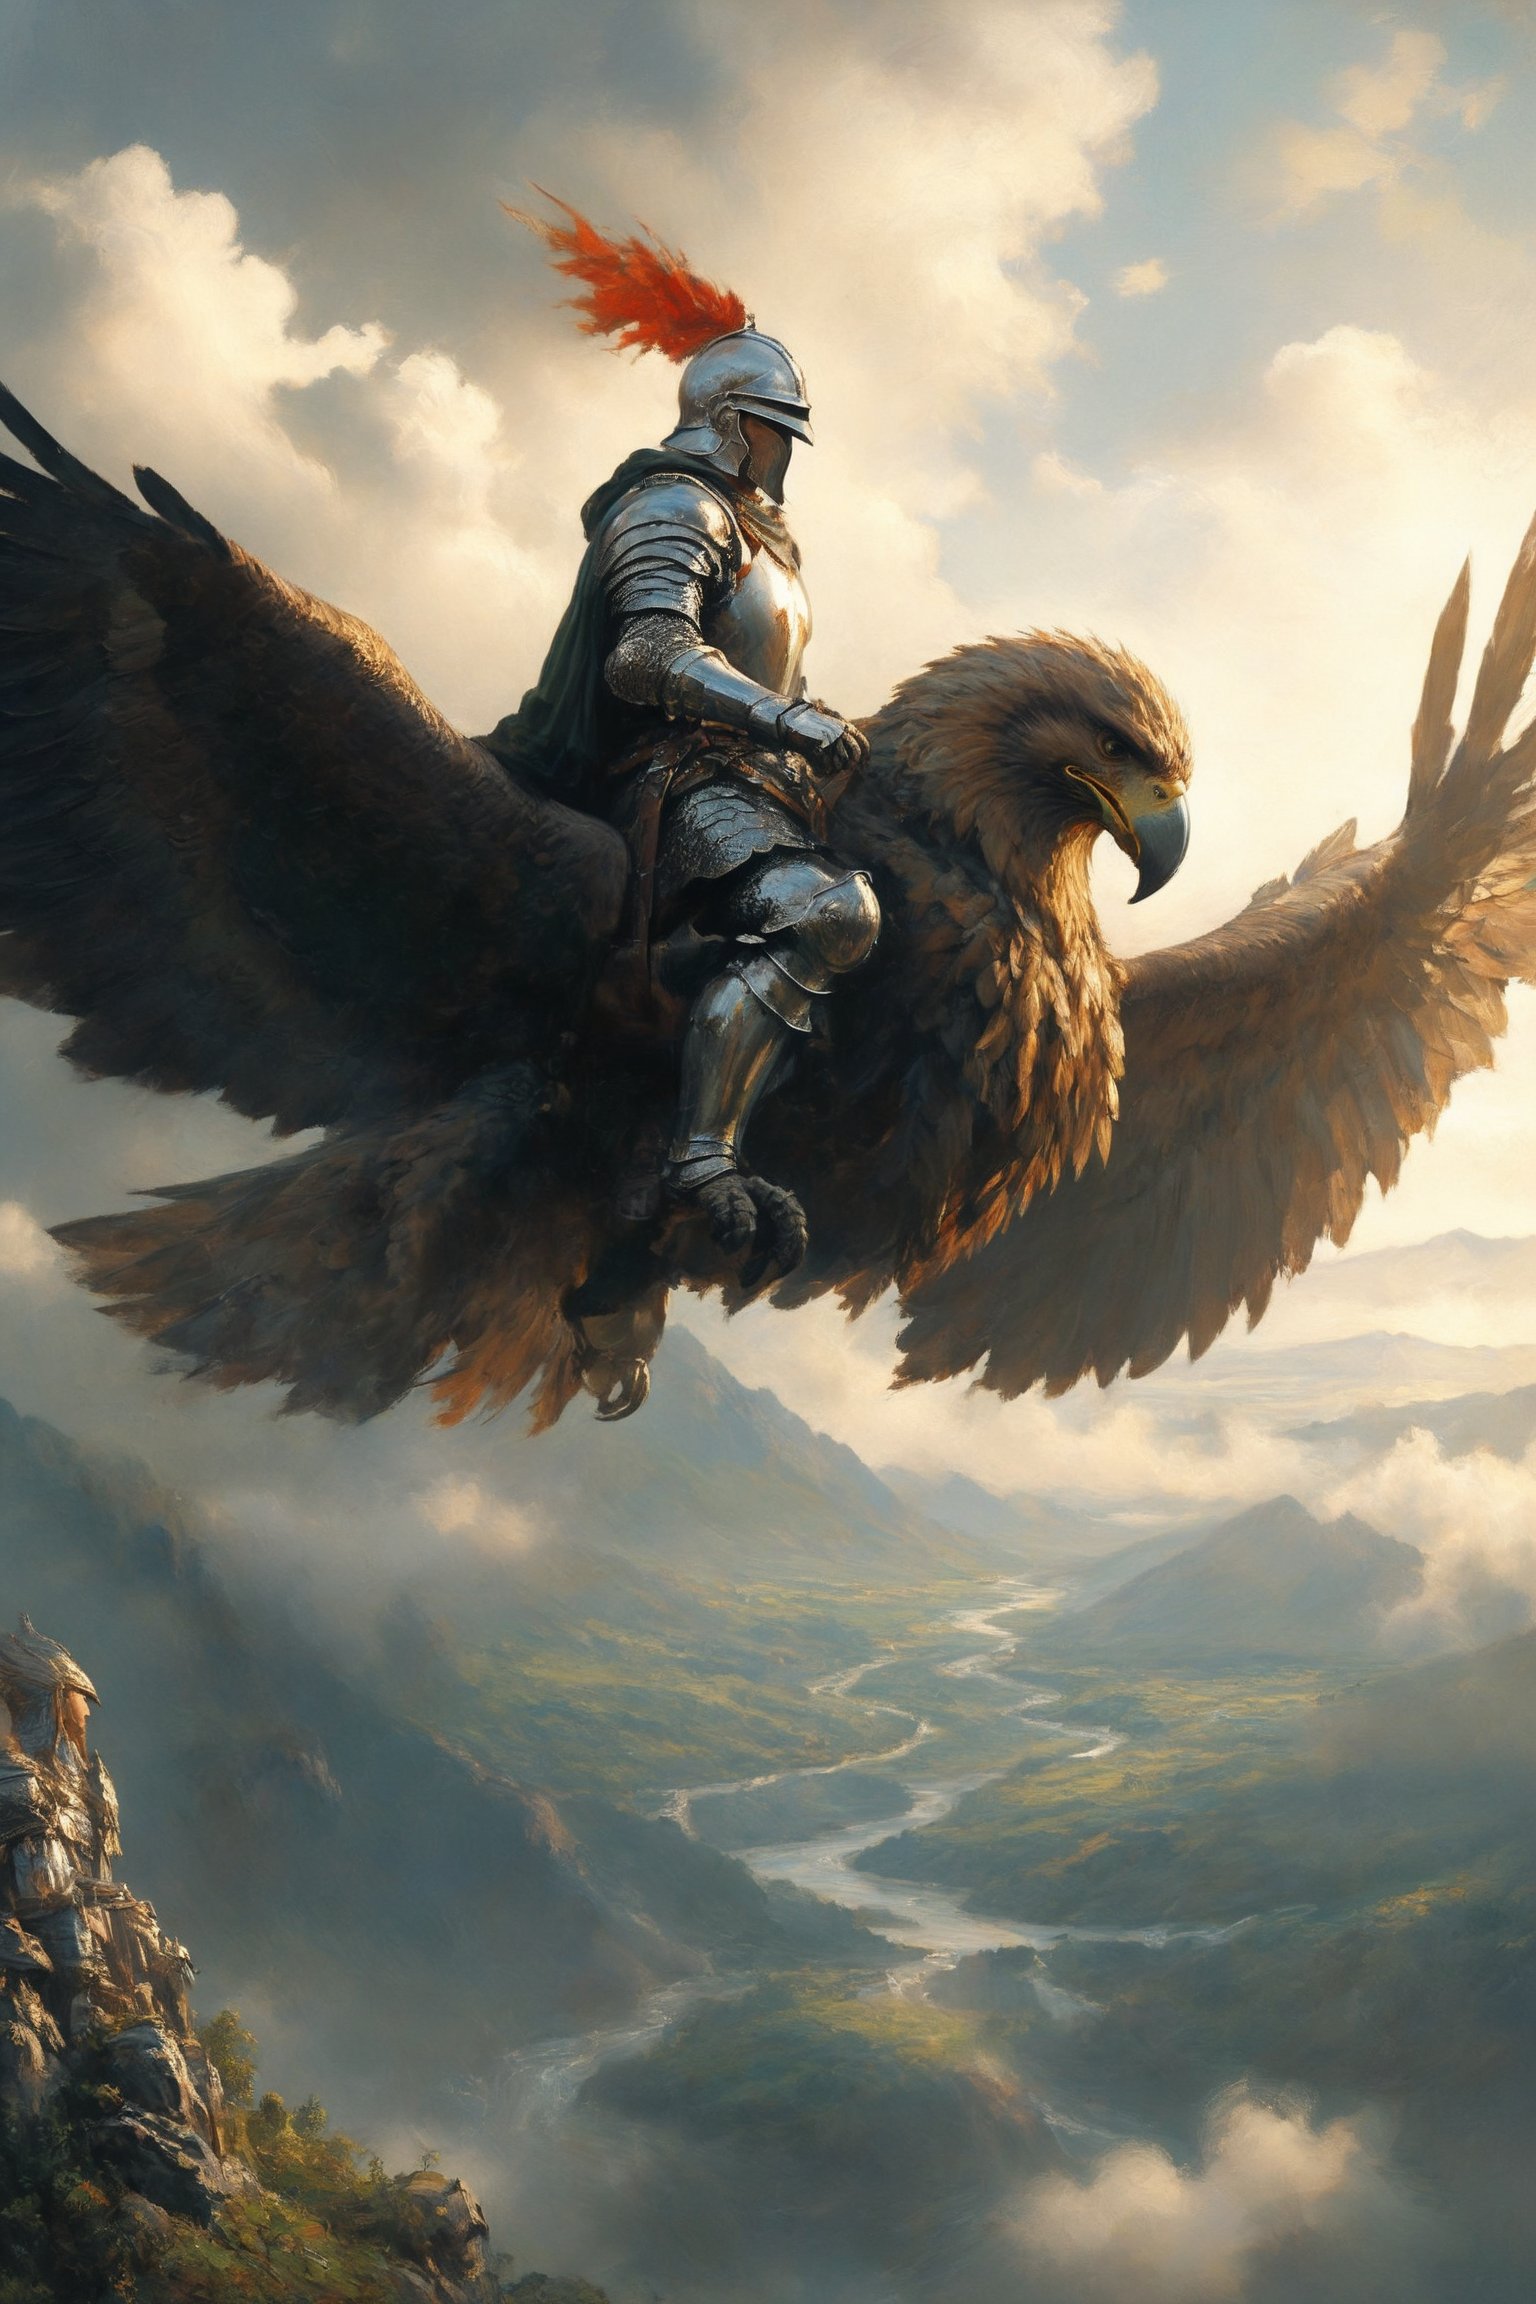 Imagine a knight soaring through the sky on the back of a majestic giant eagle. The knight is clad in shining armor, glinting in the sunlight, with a flowing cape billowing behind. His helmet, adorned with a plume, reveals determined eyes focused on the horizon. The giant eagle's powerful wings beat rhythmically, effortlessly carrying them above the clouds. The scenery below is a patchwork of lush forests, sparkling rivers, and distant mountains. The air is crisp and fresh, and the sense of freedom and adventure is palpable. The knight's grip is firm on the eagle's reins, ready to face any challenge that might arise from the enchanting world below.